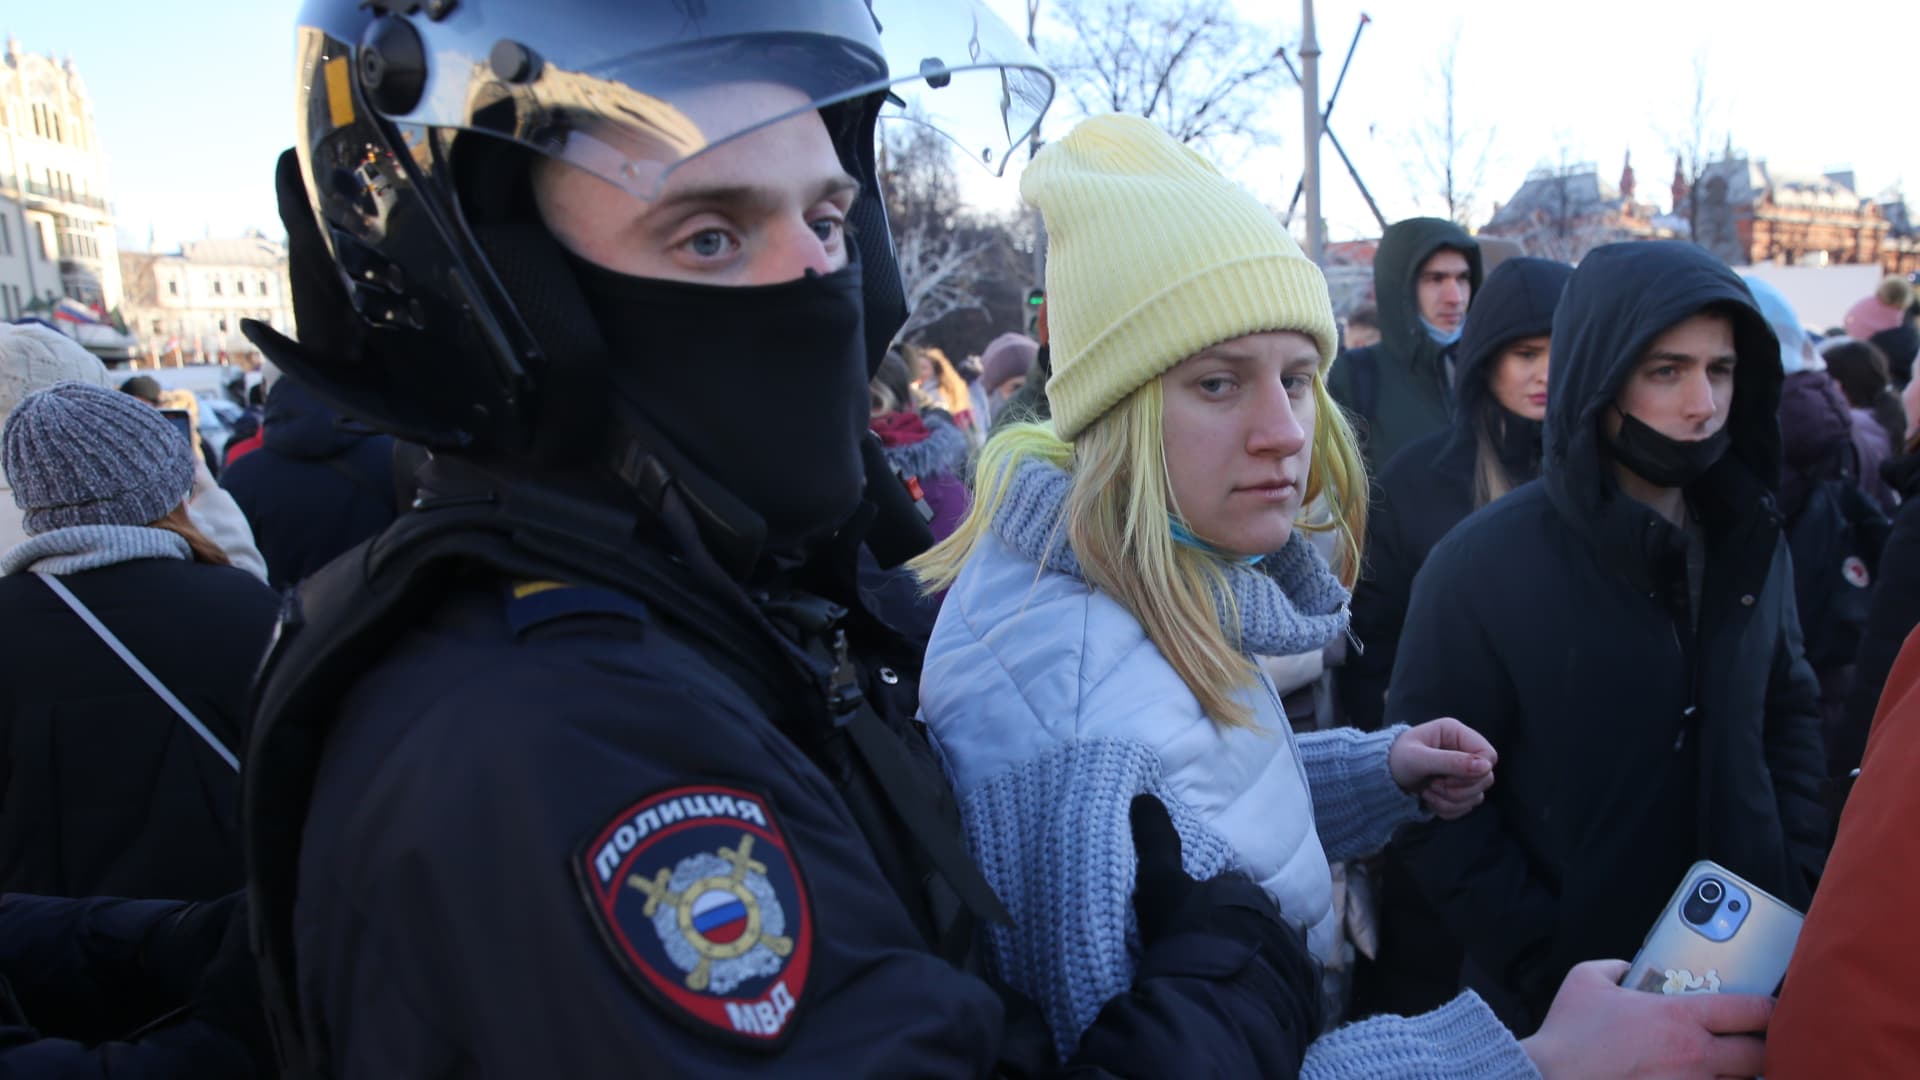 A Russian Police officer detains a woman during an unsanctioned protest rally against the military invasion on Ukraine, March,6,2022, in Central Moscow, Russia.